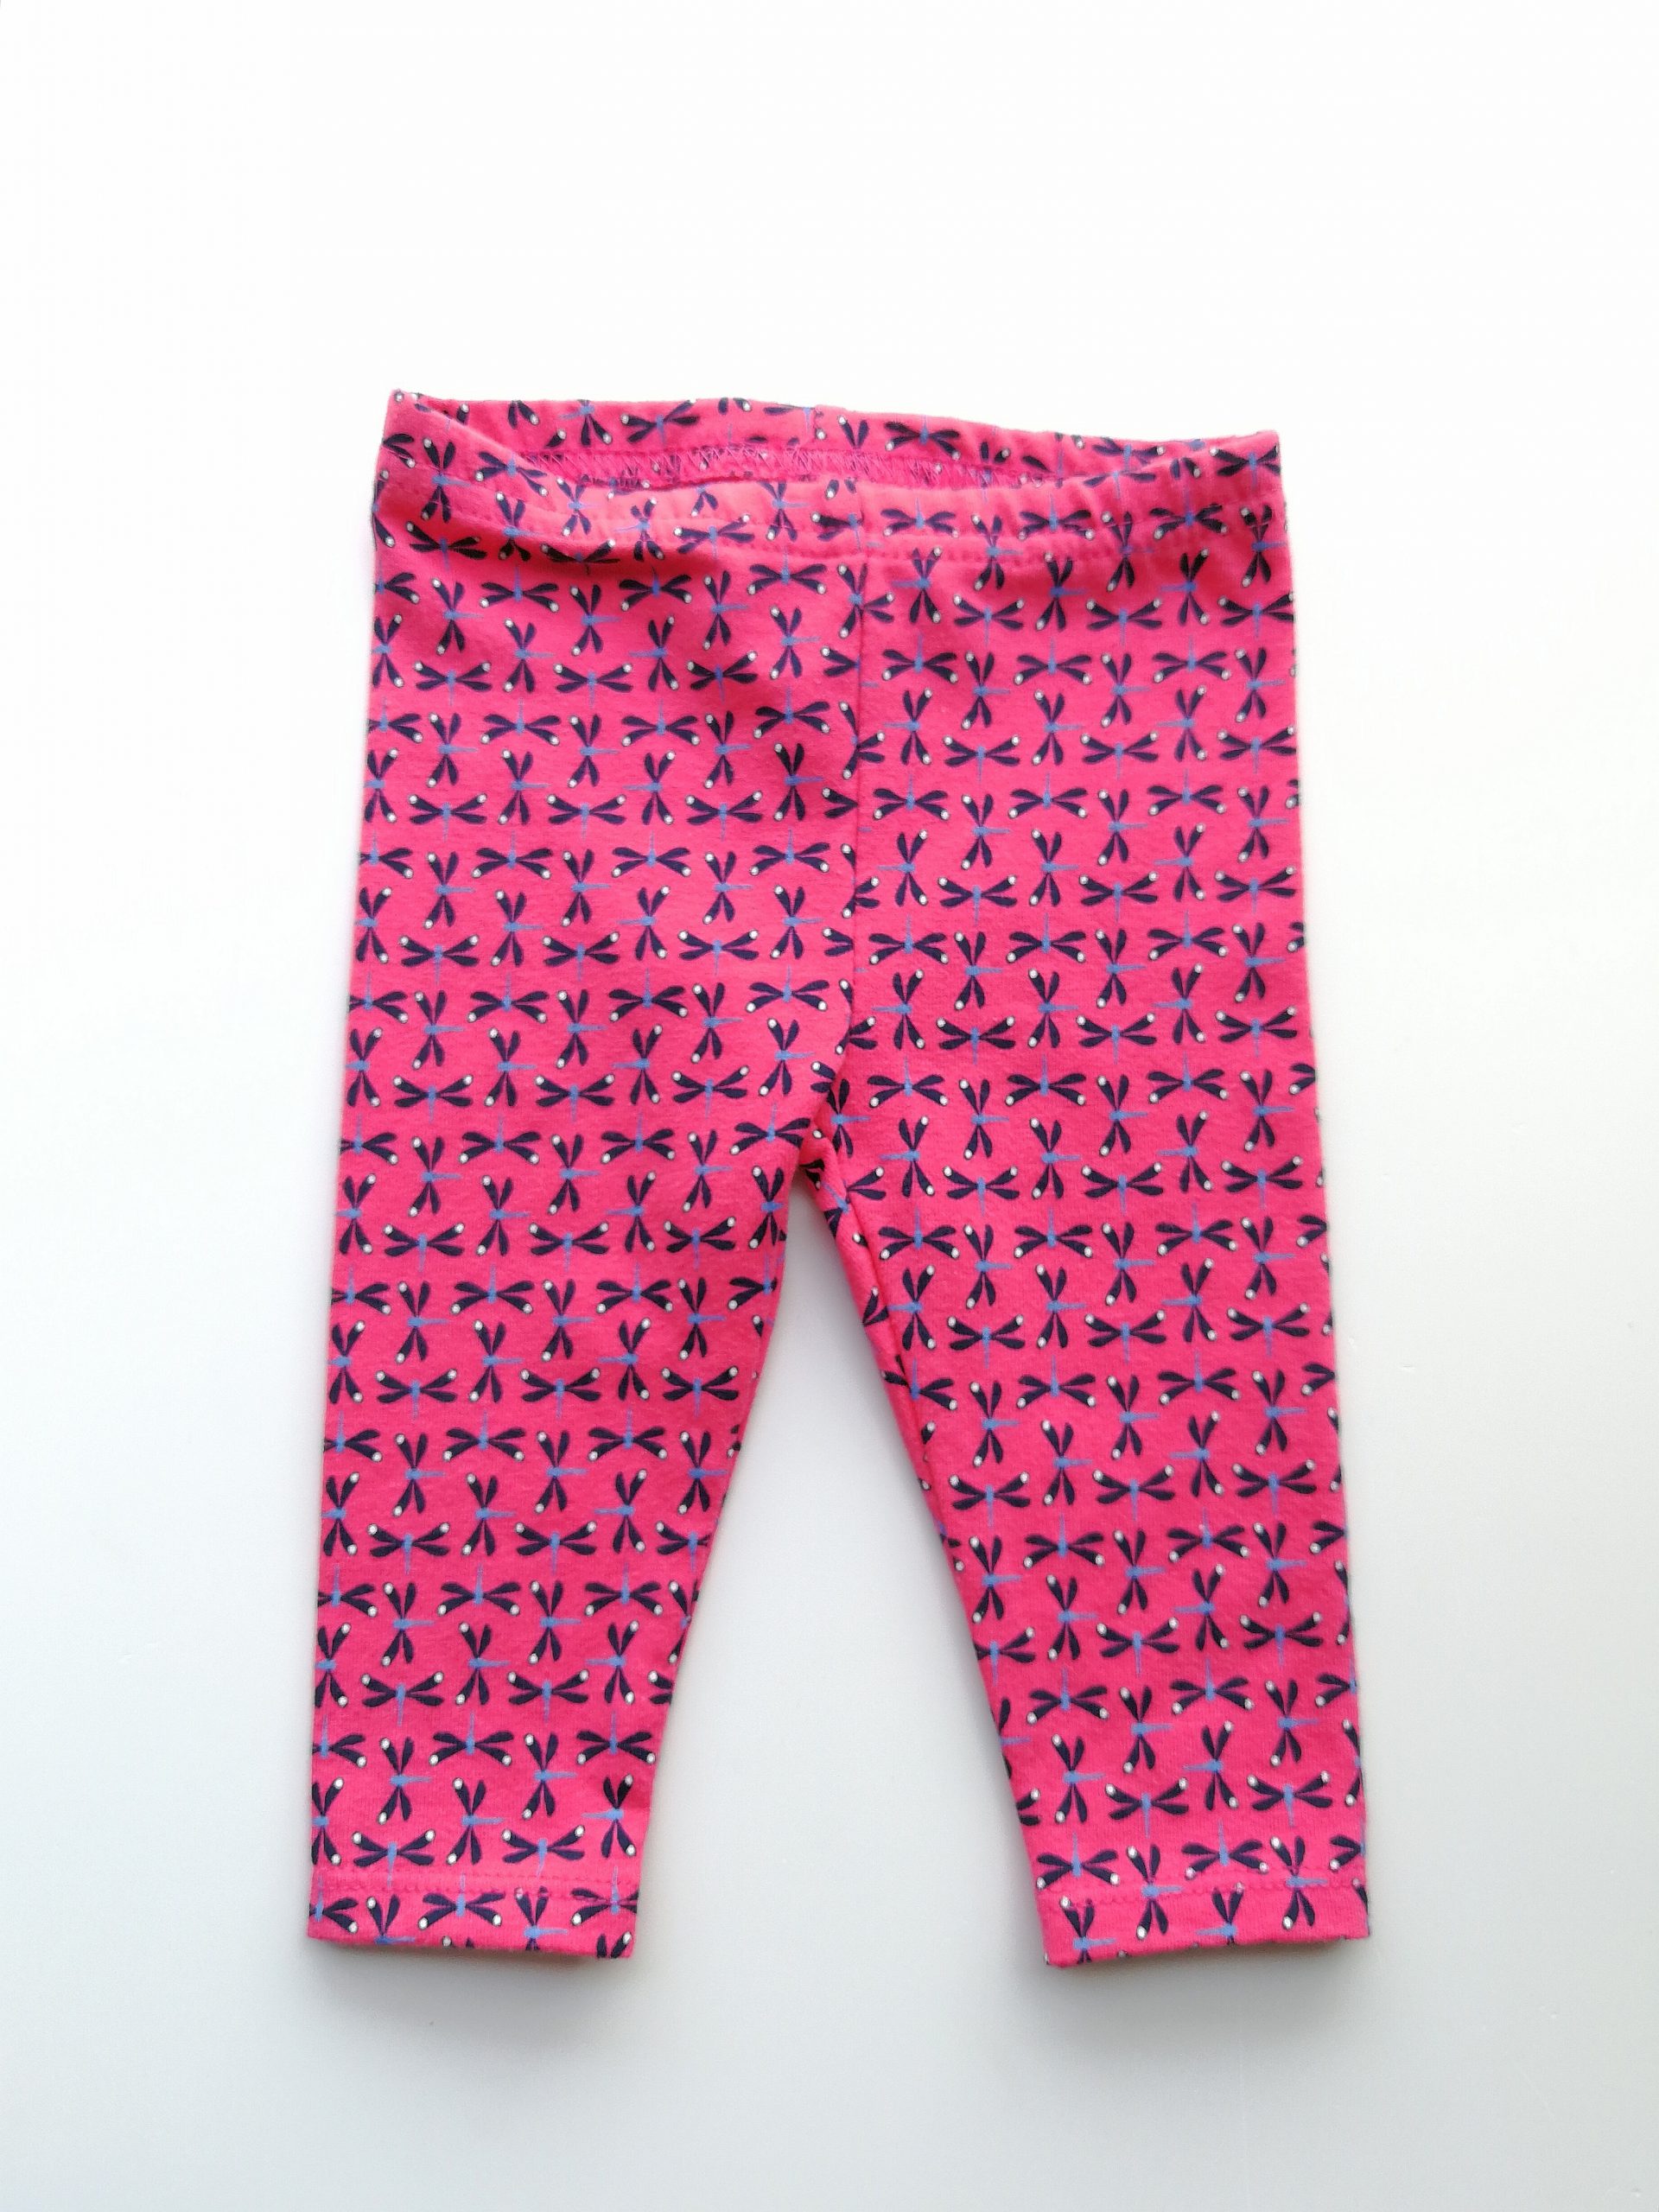 Firefly pink pants 0-3months | FabricStore